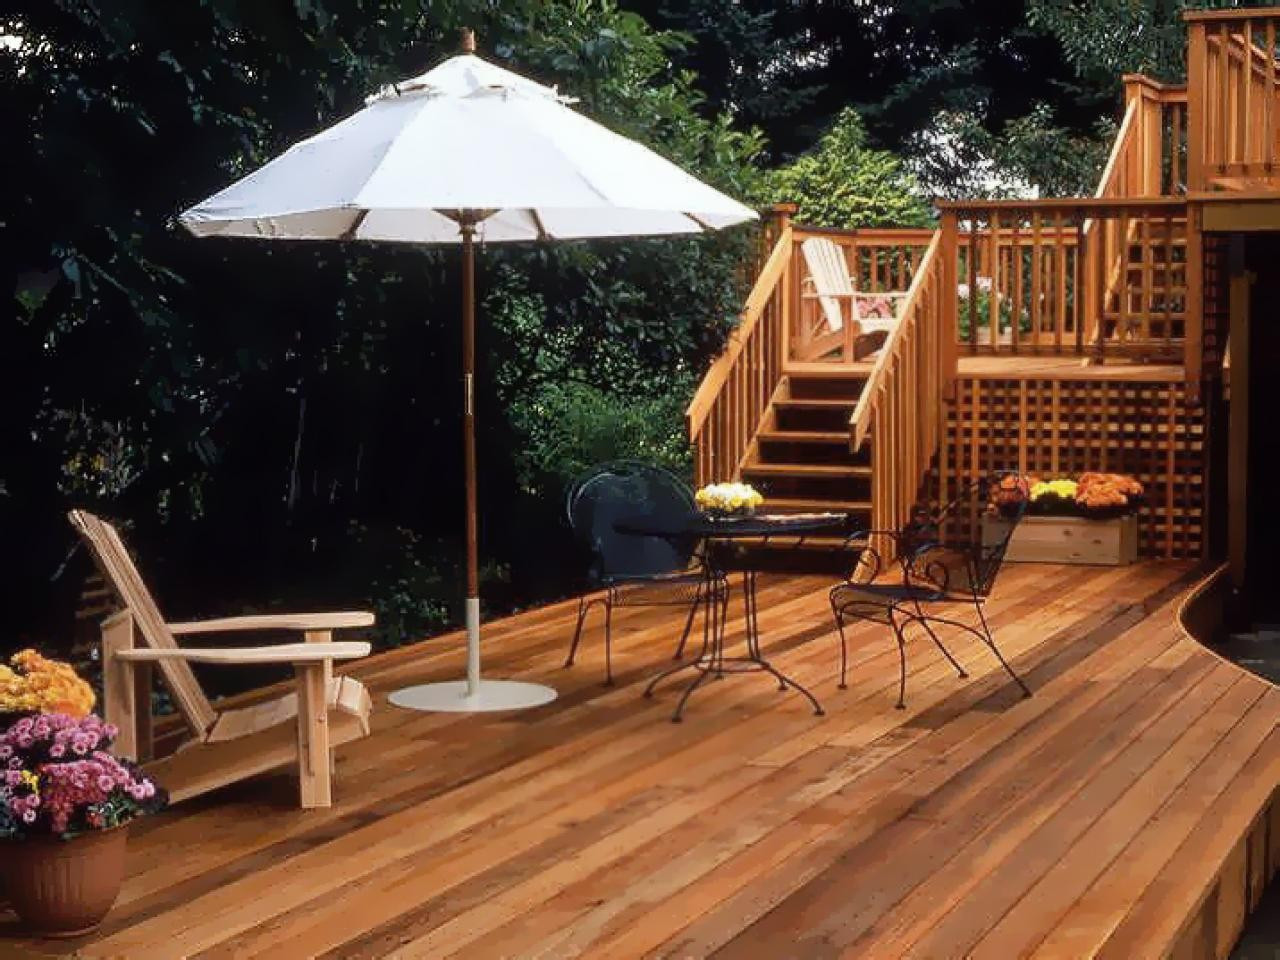 20 Nice Hardwood Flooring at the Home Depot 2024 free download hardwood flooring at the home depot of deck plans home depot luxury wood decking materials devlabmtl org intended for deck plans home depot luxury wood decking materials of deck plans home d